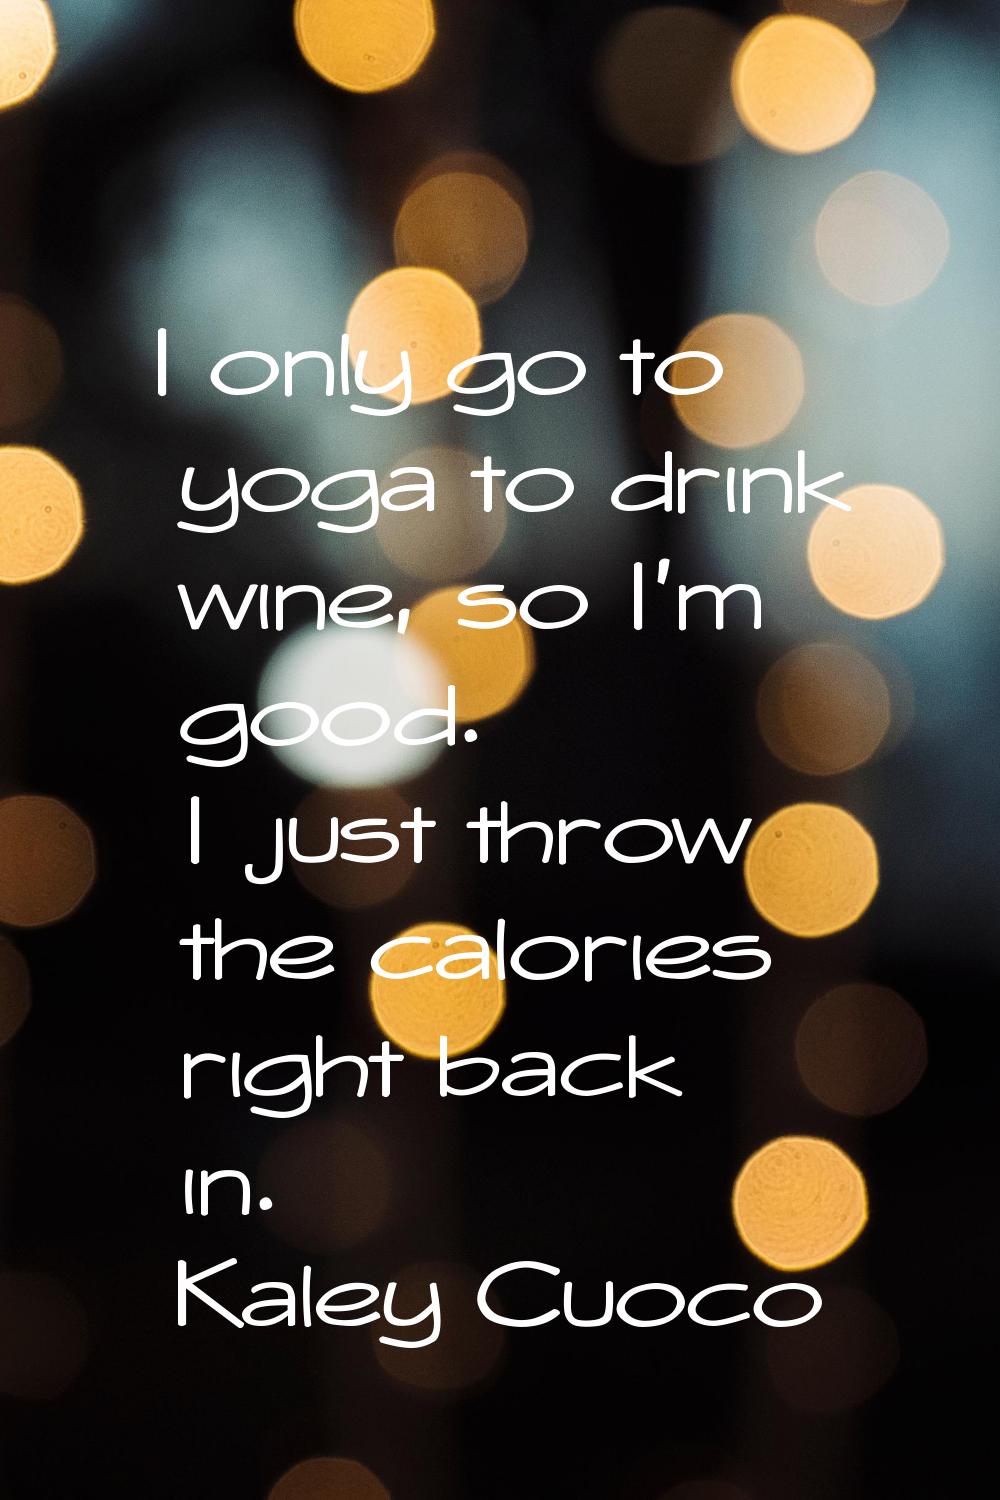 I only go to yoga to drink wine, so I'm good. I just throw the calories right back in.